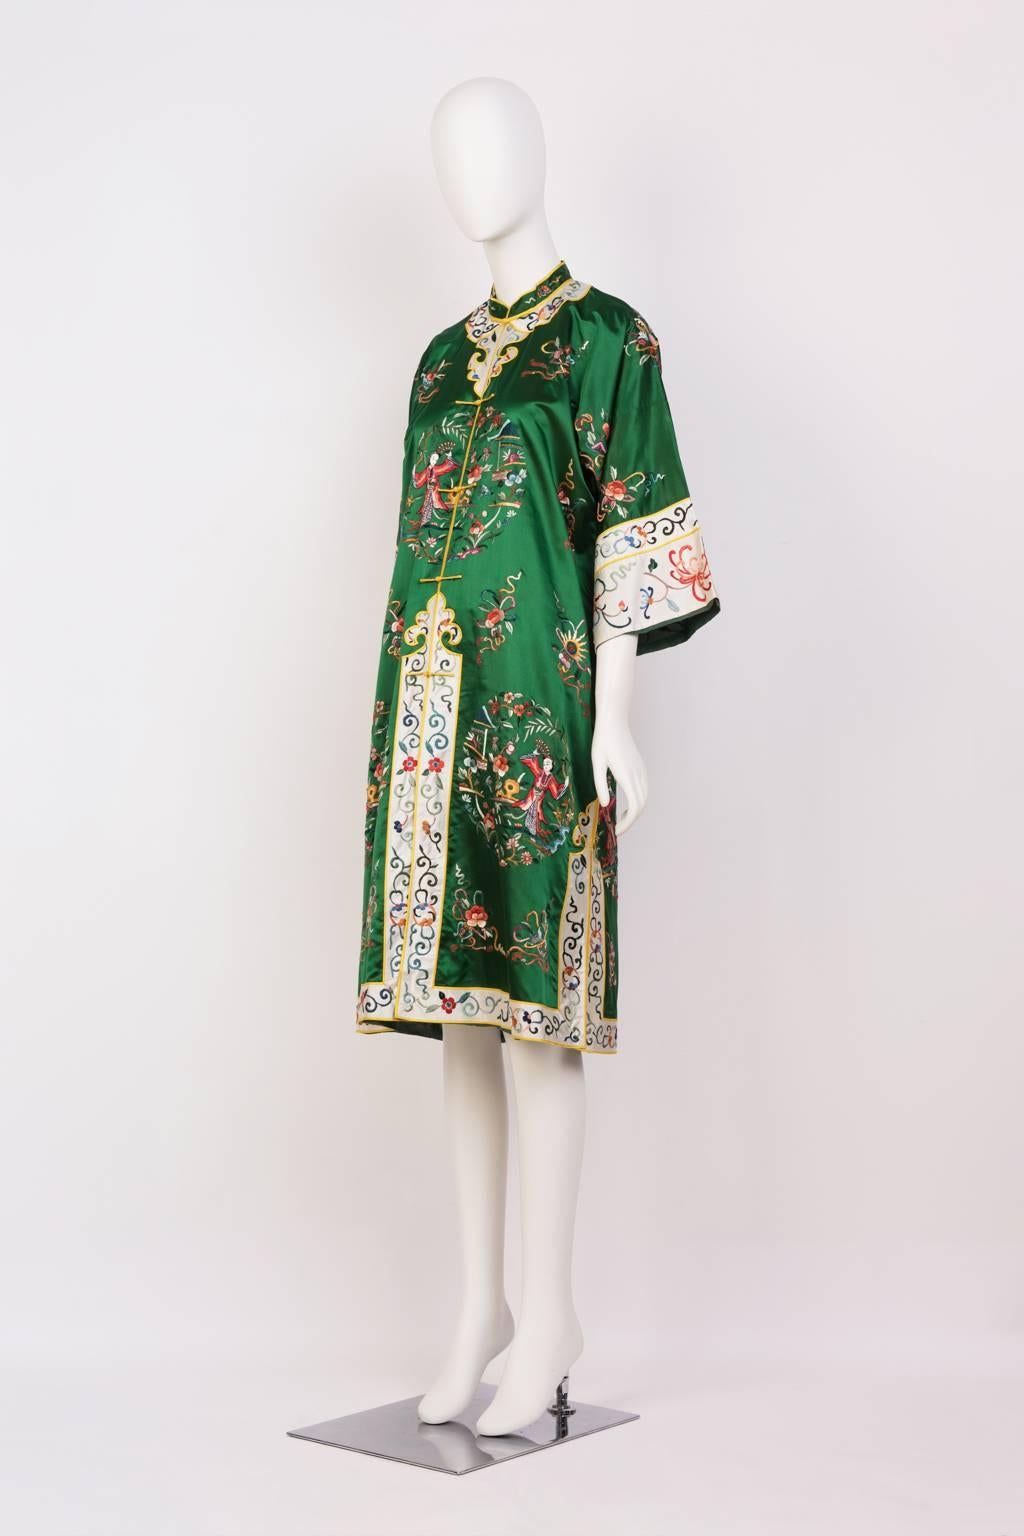 Llined, knee-length Robe dress, elegantly hand embroidered with a garden motif, in emerald green silk.